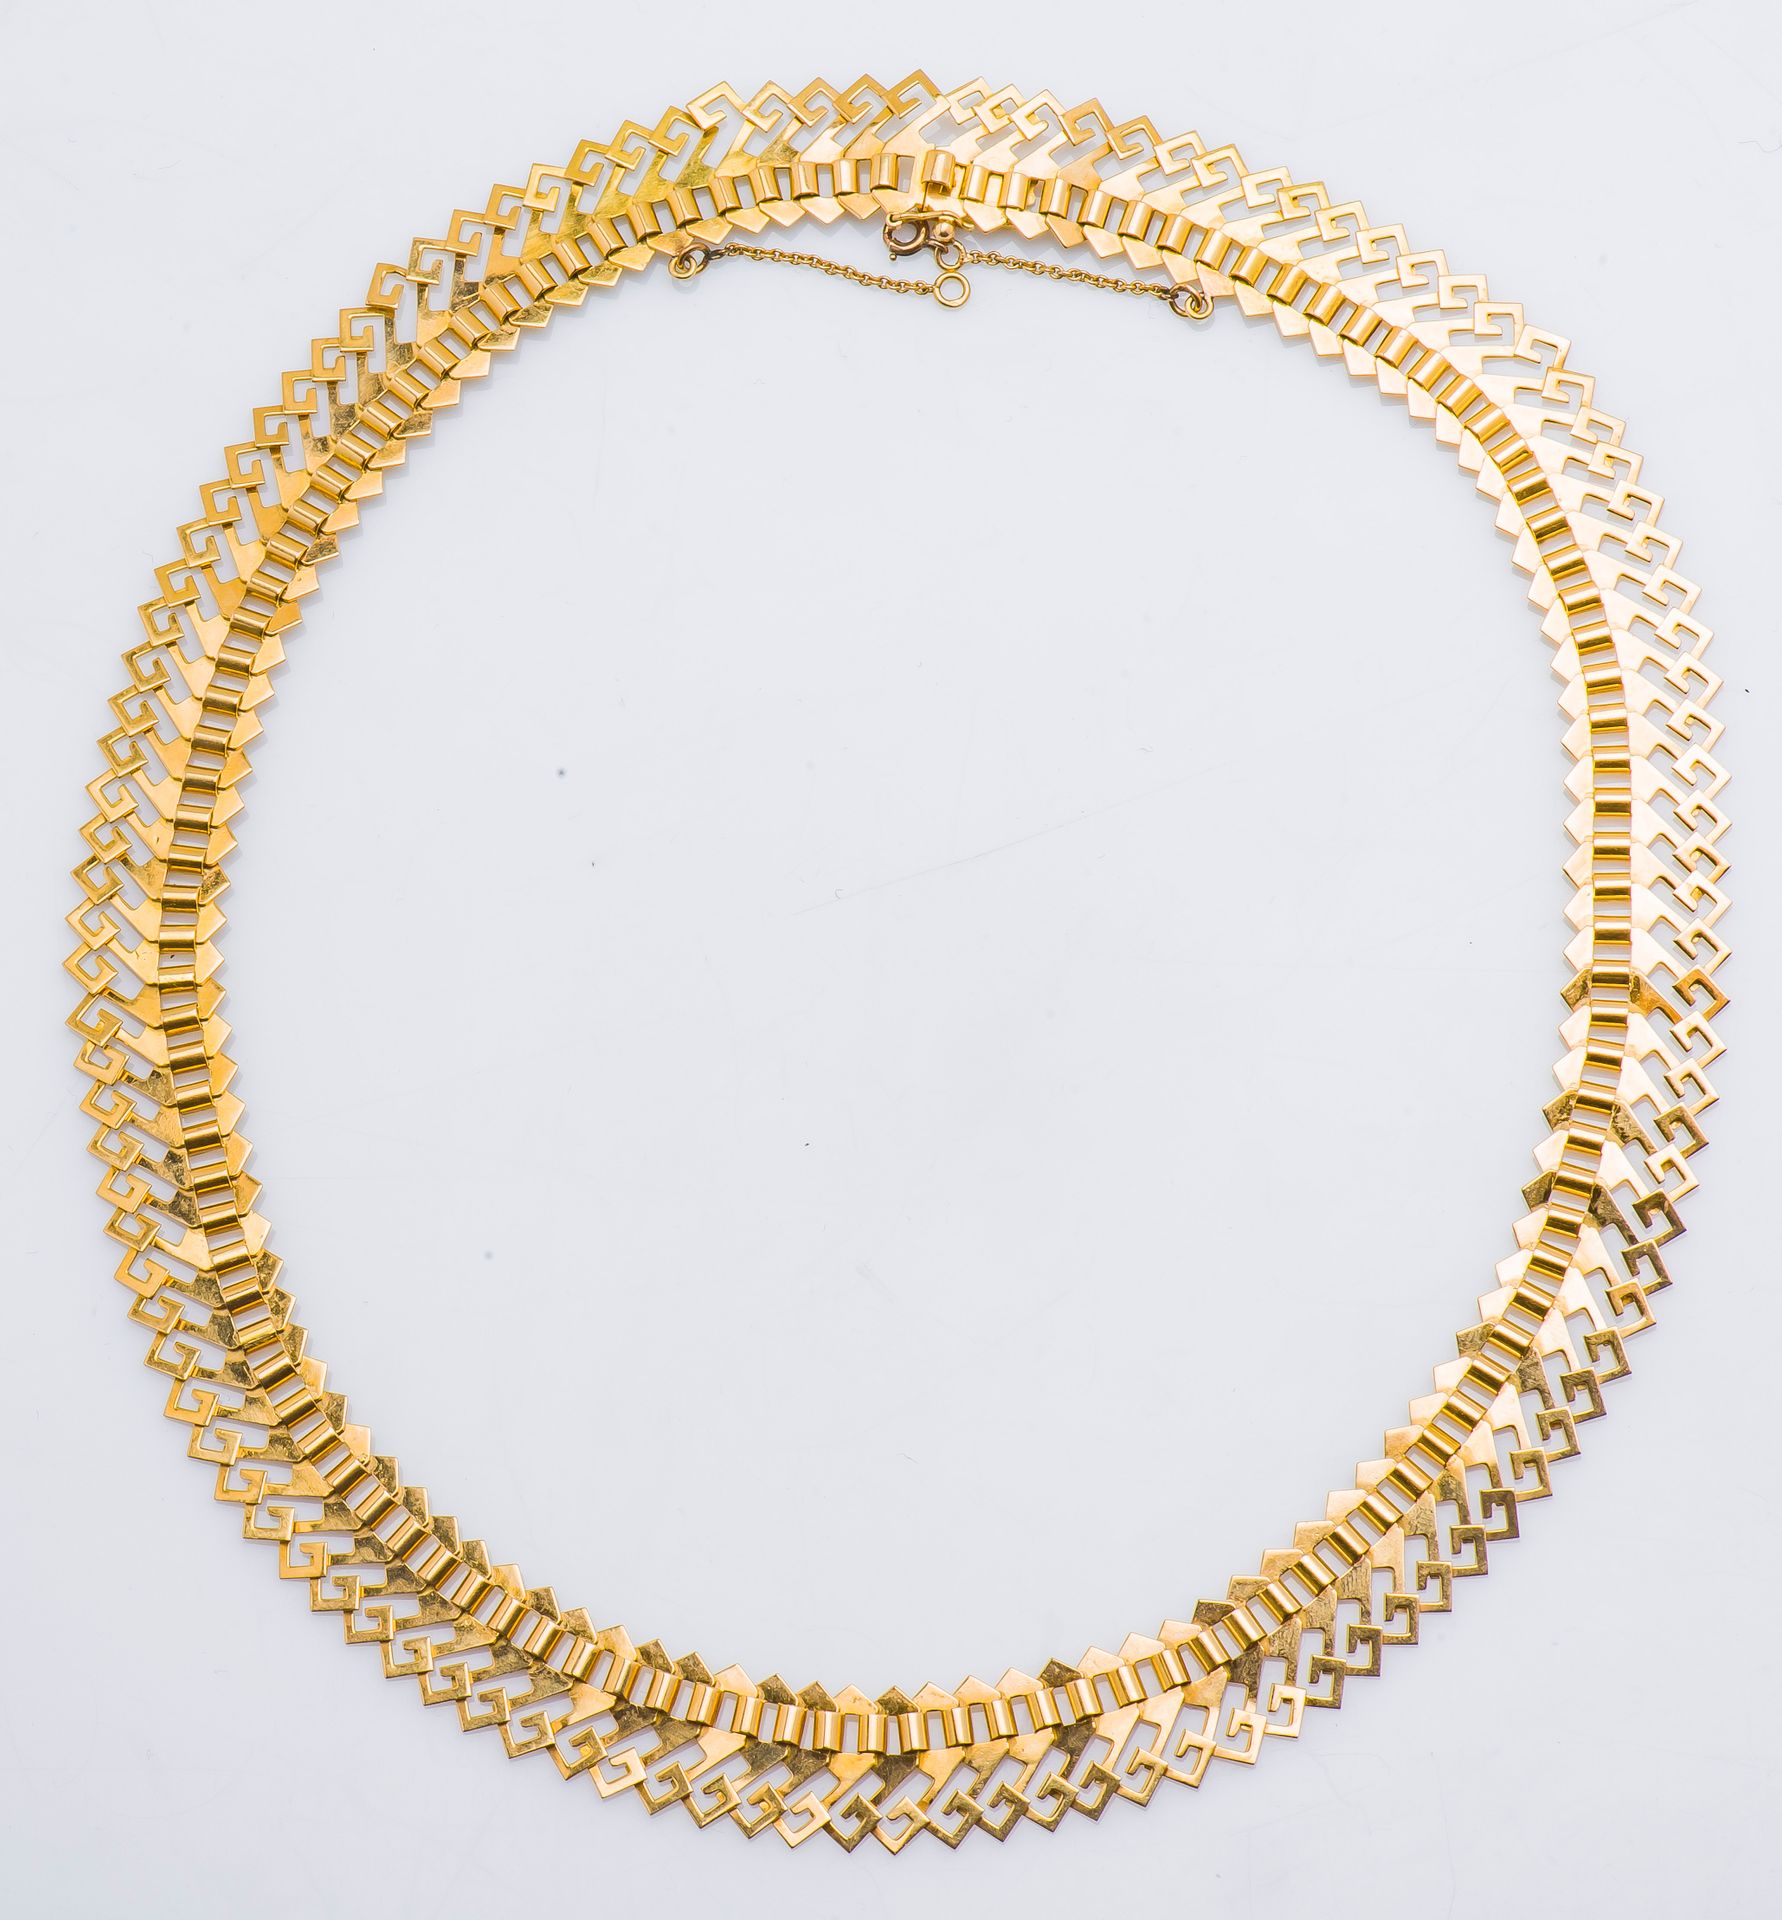 Null 
Necklace collar in yellow gold 18 carats (750 thousandths) drawing a geome&hellip;